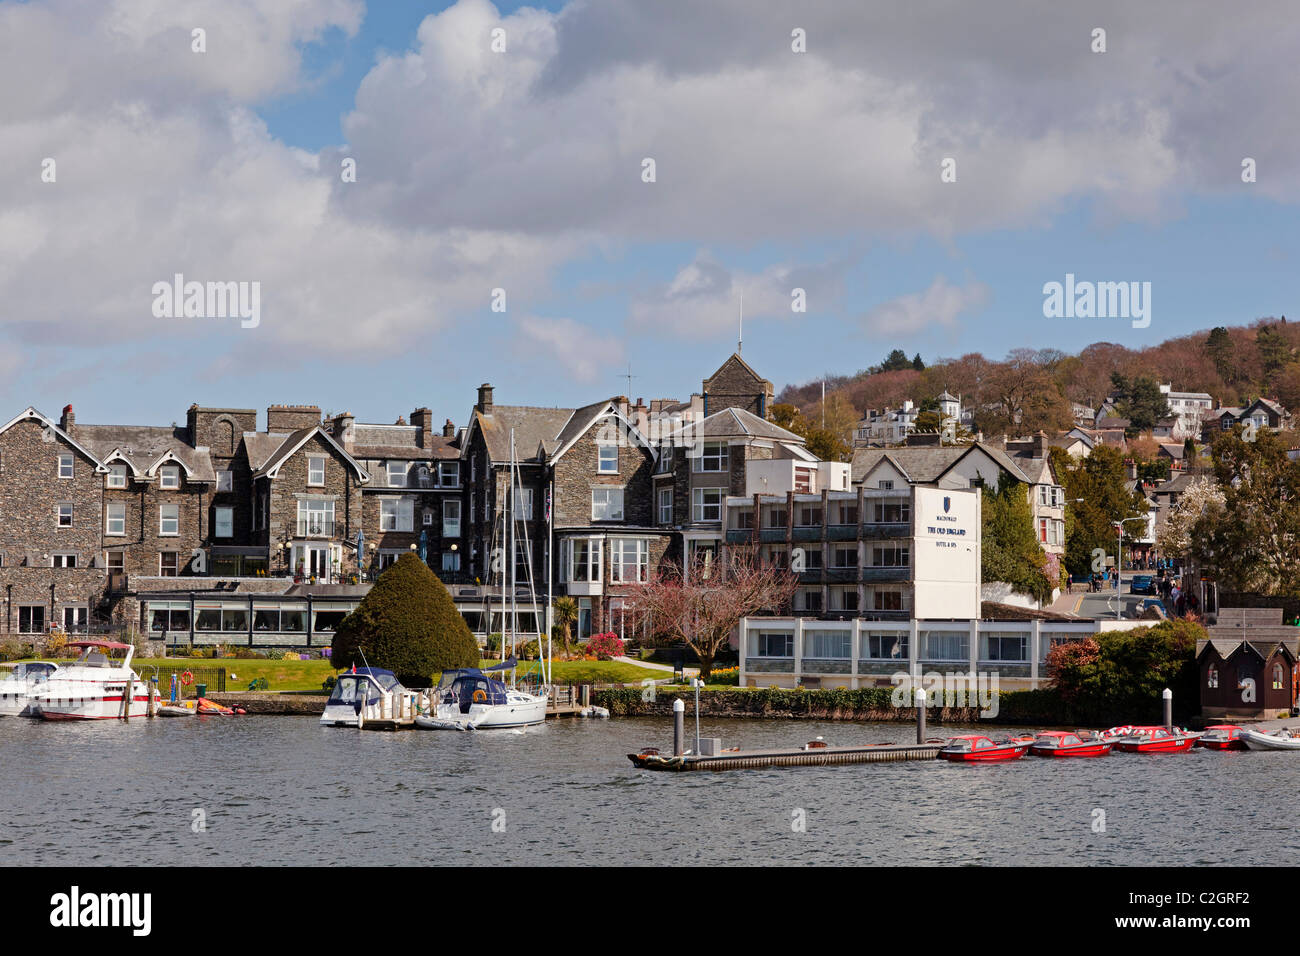 The Old England hotel at Bowness on Windermere Stock Photo